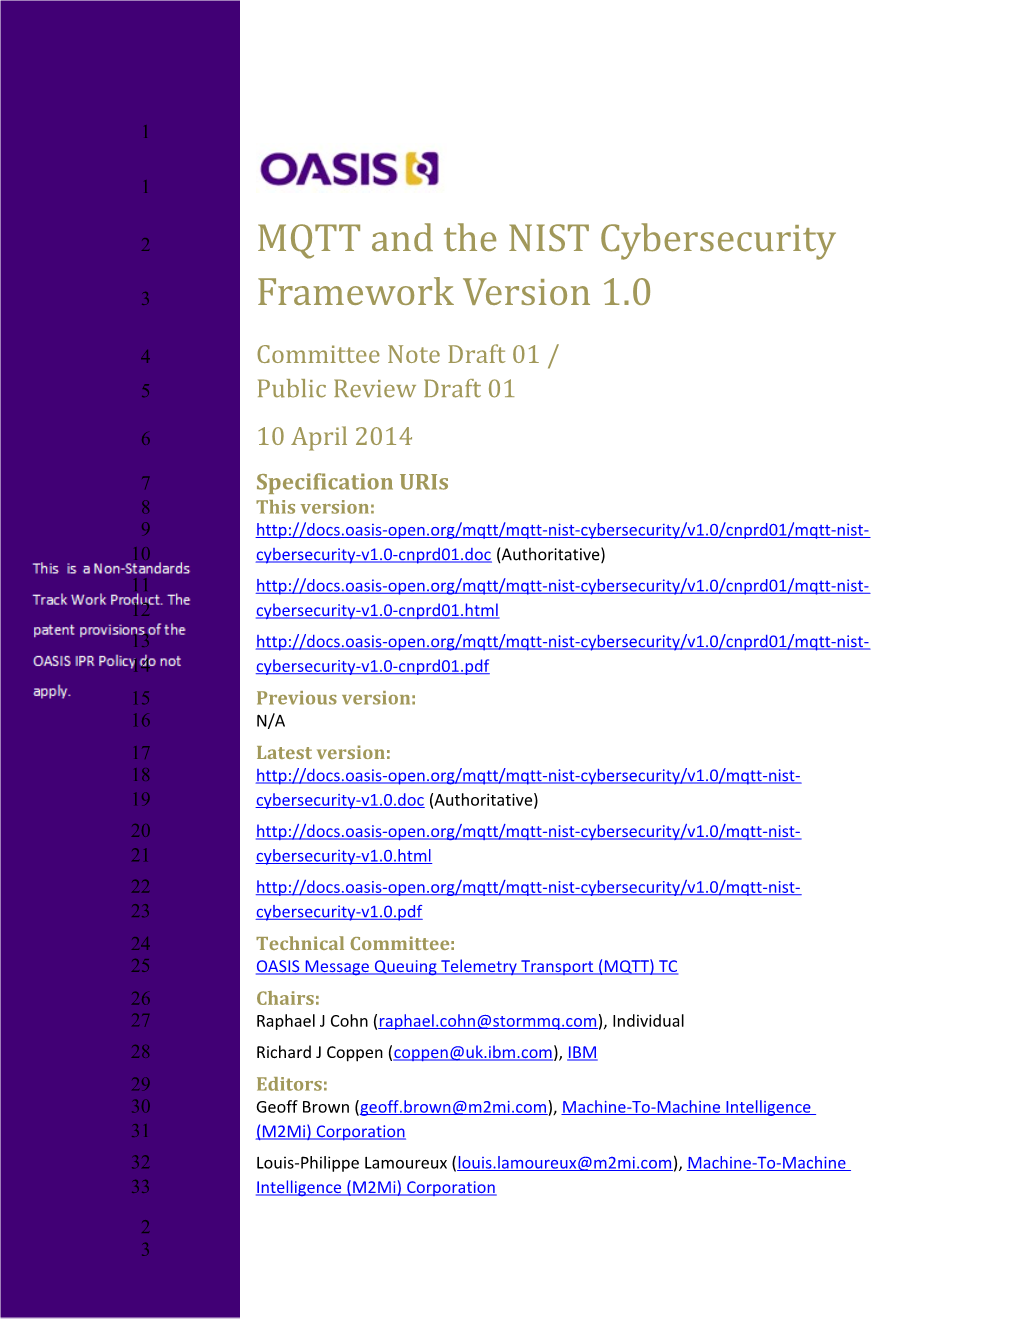 MQTT and the NIST Cybersecurity Framework Version 1.0